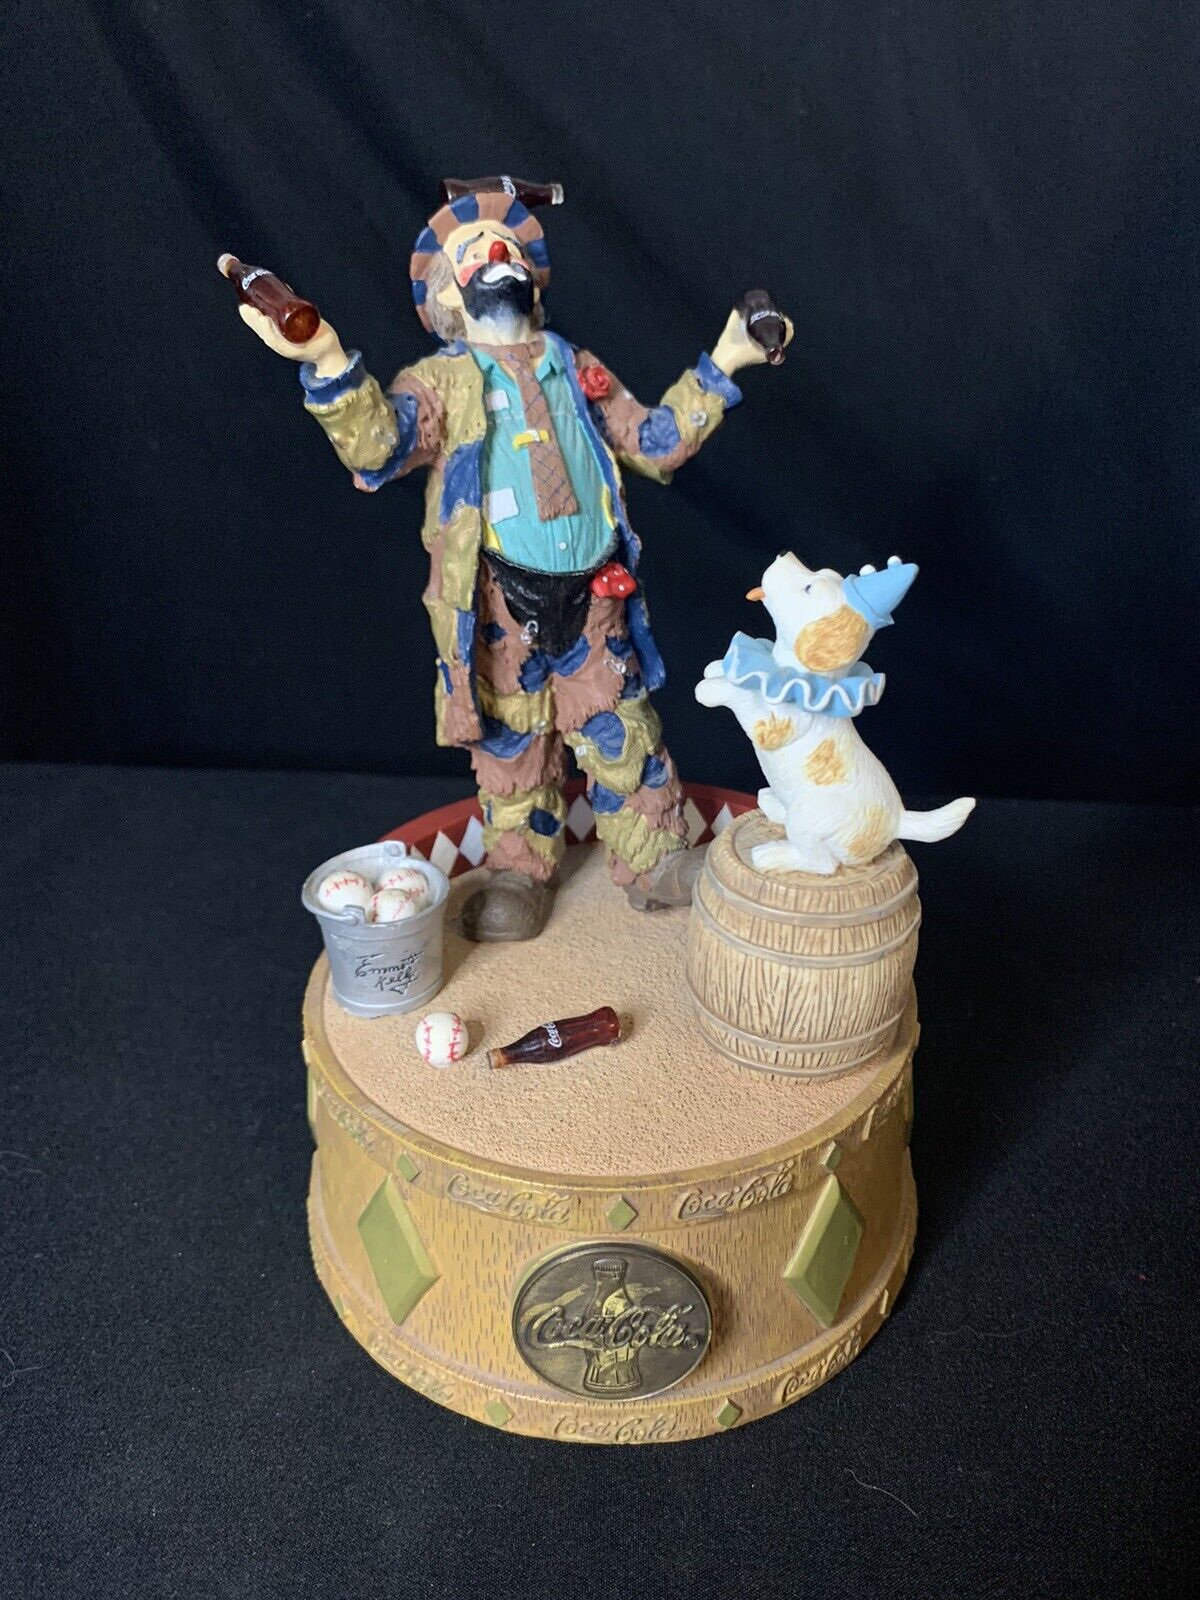 Coca-Cola Emmett Kelly Refreshes You Best Limited Edition Musical Figurine 1995